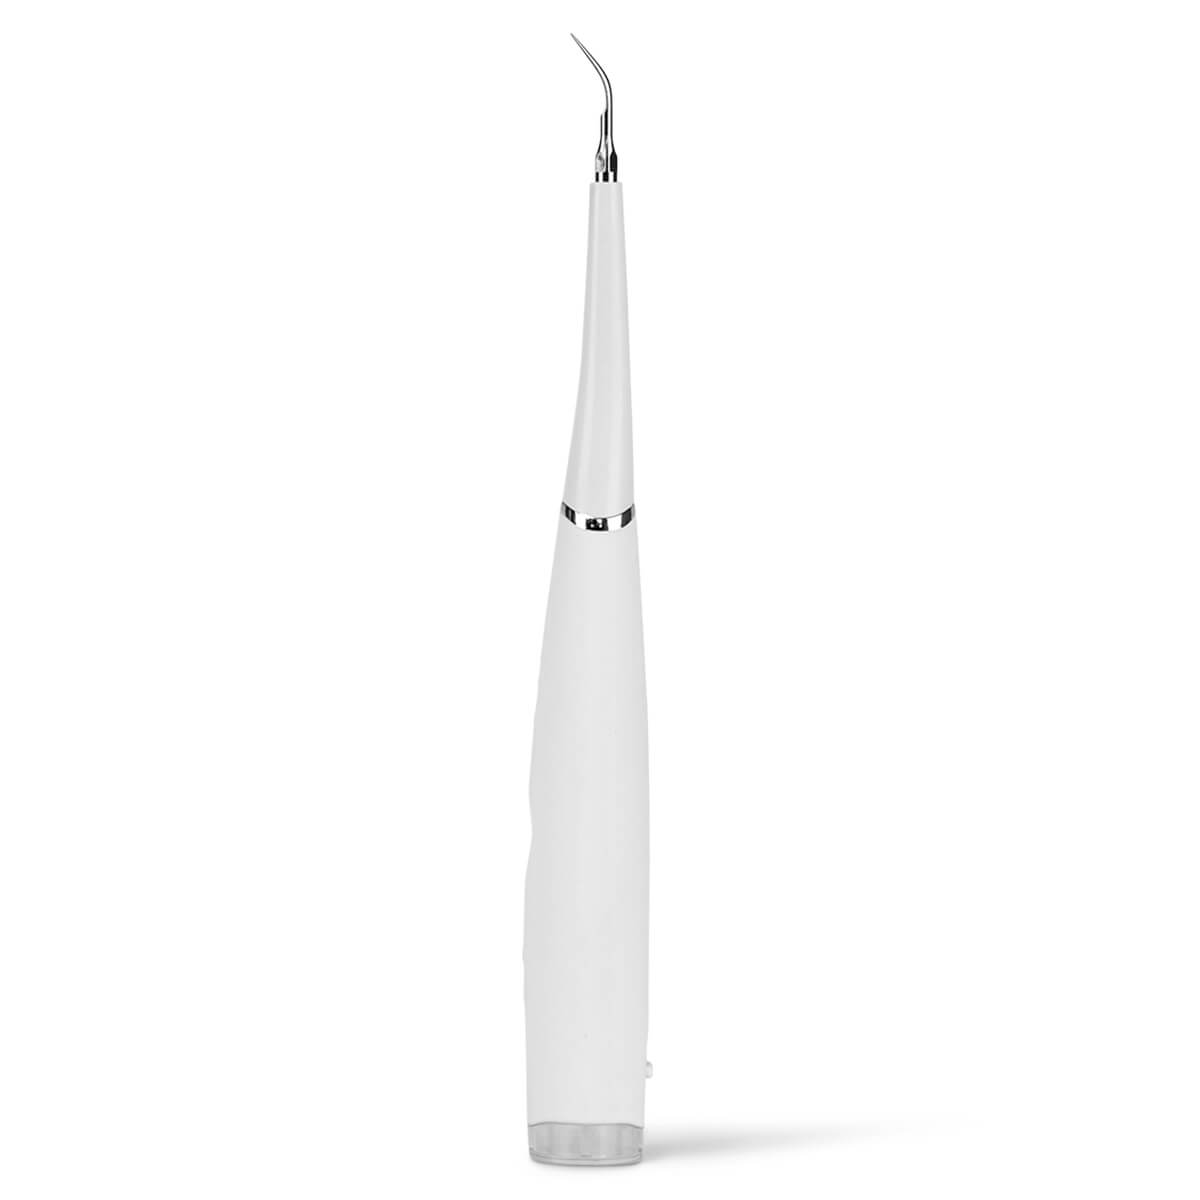 Ultrasonic Tooth Cleaner - Plaque Remover - Smile Therapy